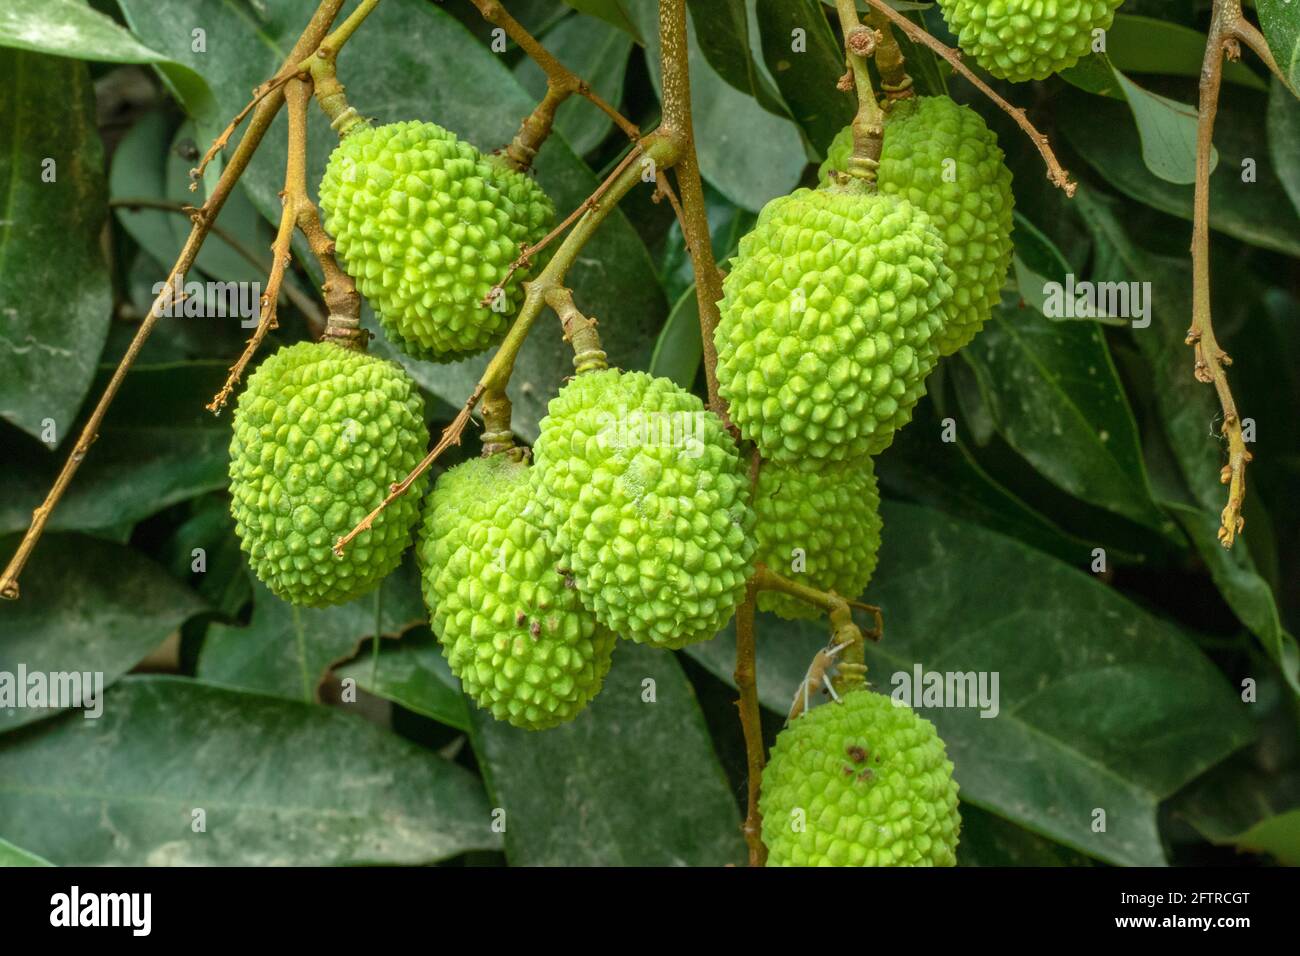 Raw green litchi which is a seasonal fruit and very sweet delicious closeup Stock Photo